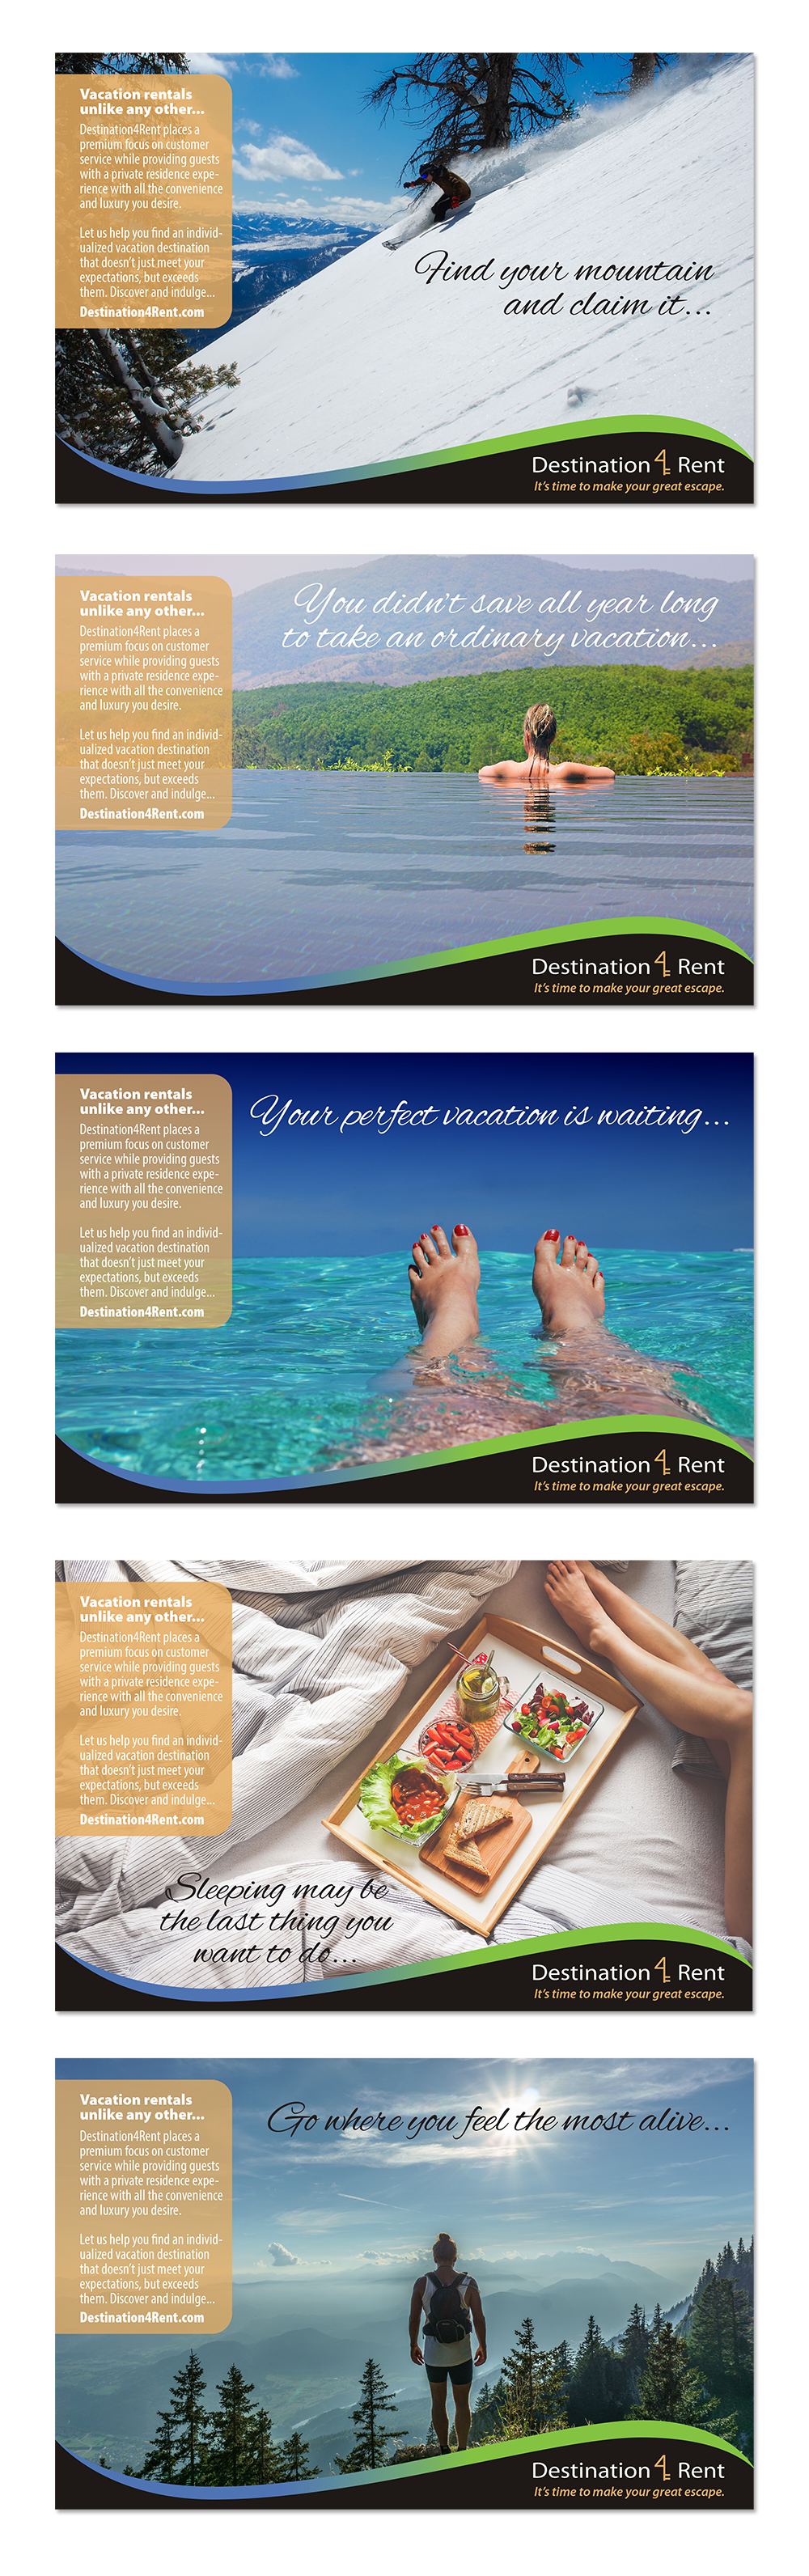 campaign copywriting  Creative Direction  hotels print ad Tourist Advertising